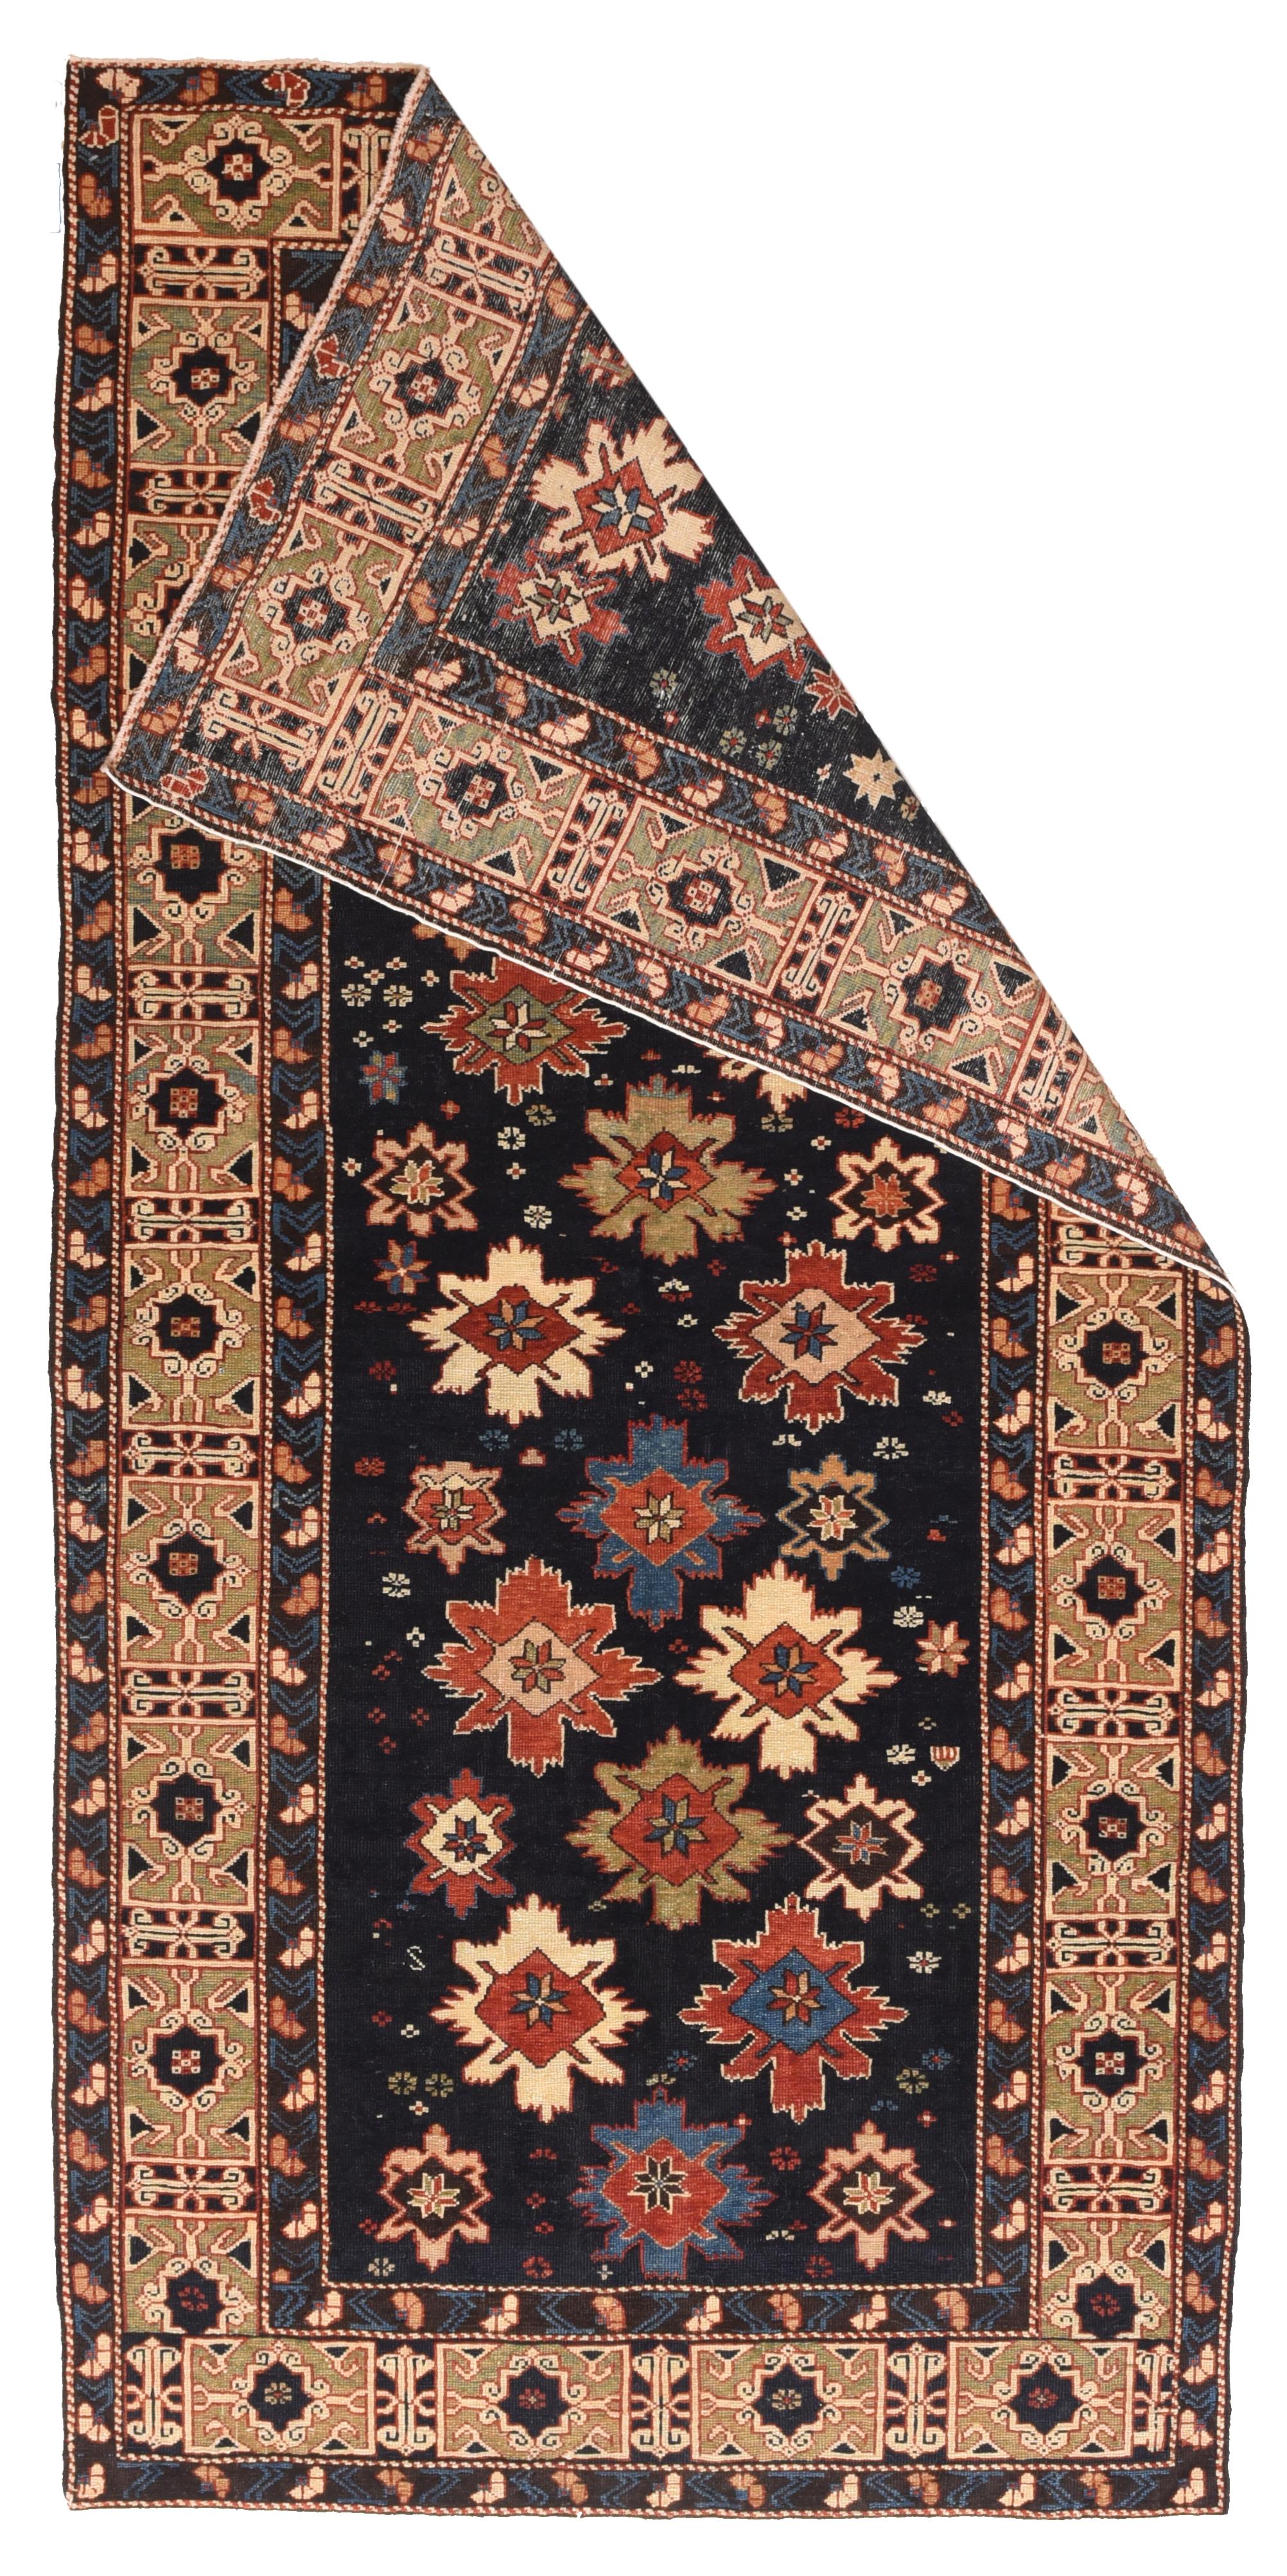 This is one of the most iconic of Caucasian rug patterns. The nearly navy field hosts a fall of “snowfakes” in reds, blues, ivory and khaki. making a subtle diagonal over-patterns. Stars and smaller geometric forms are sprinkled about. Khaki main